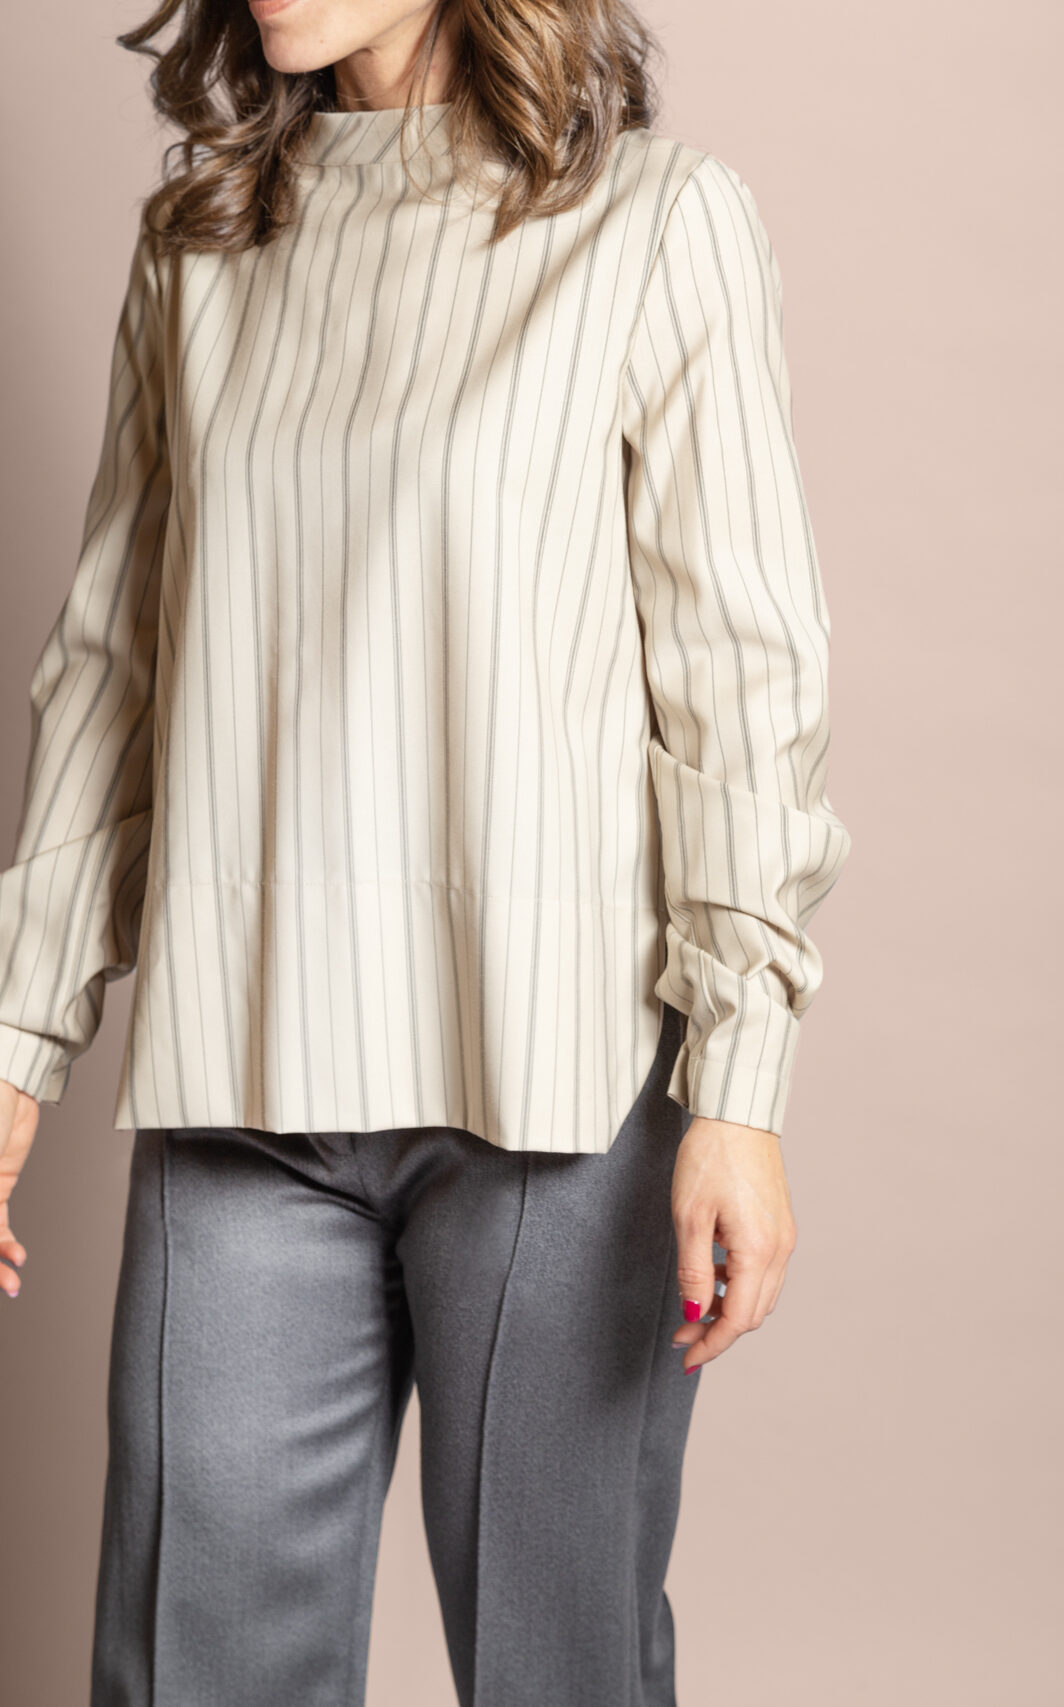 beclò atelier made in italy blusa camicia collo cratere lana bianco Pam